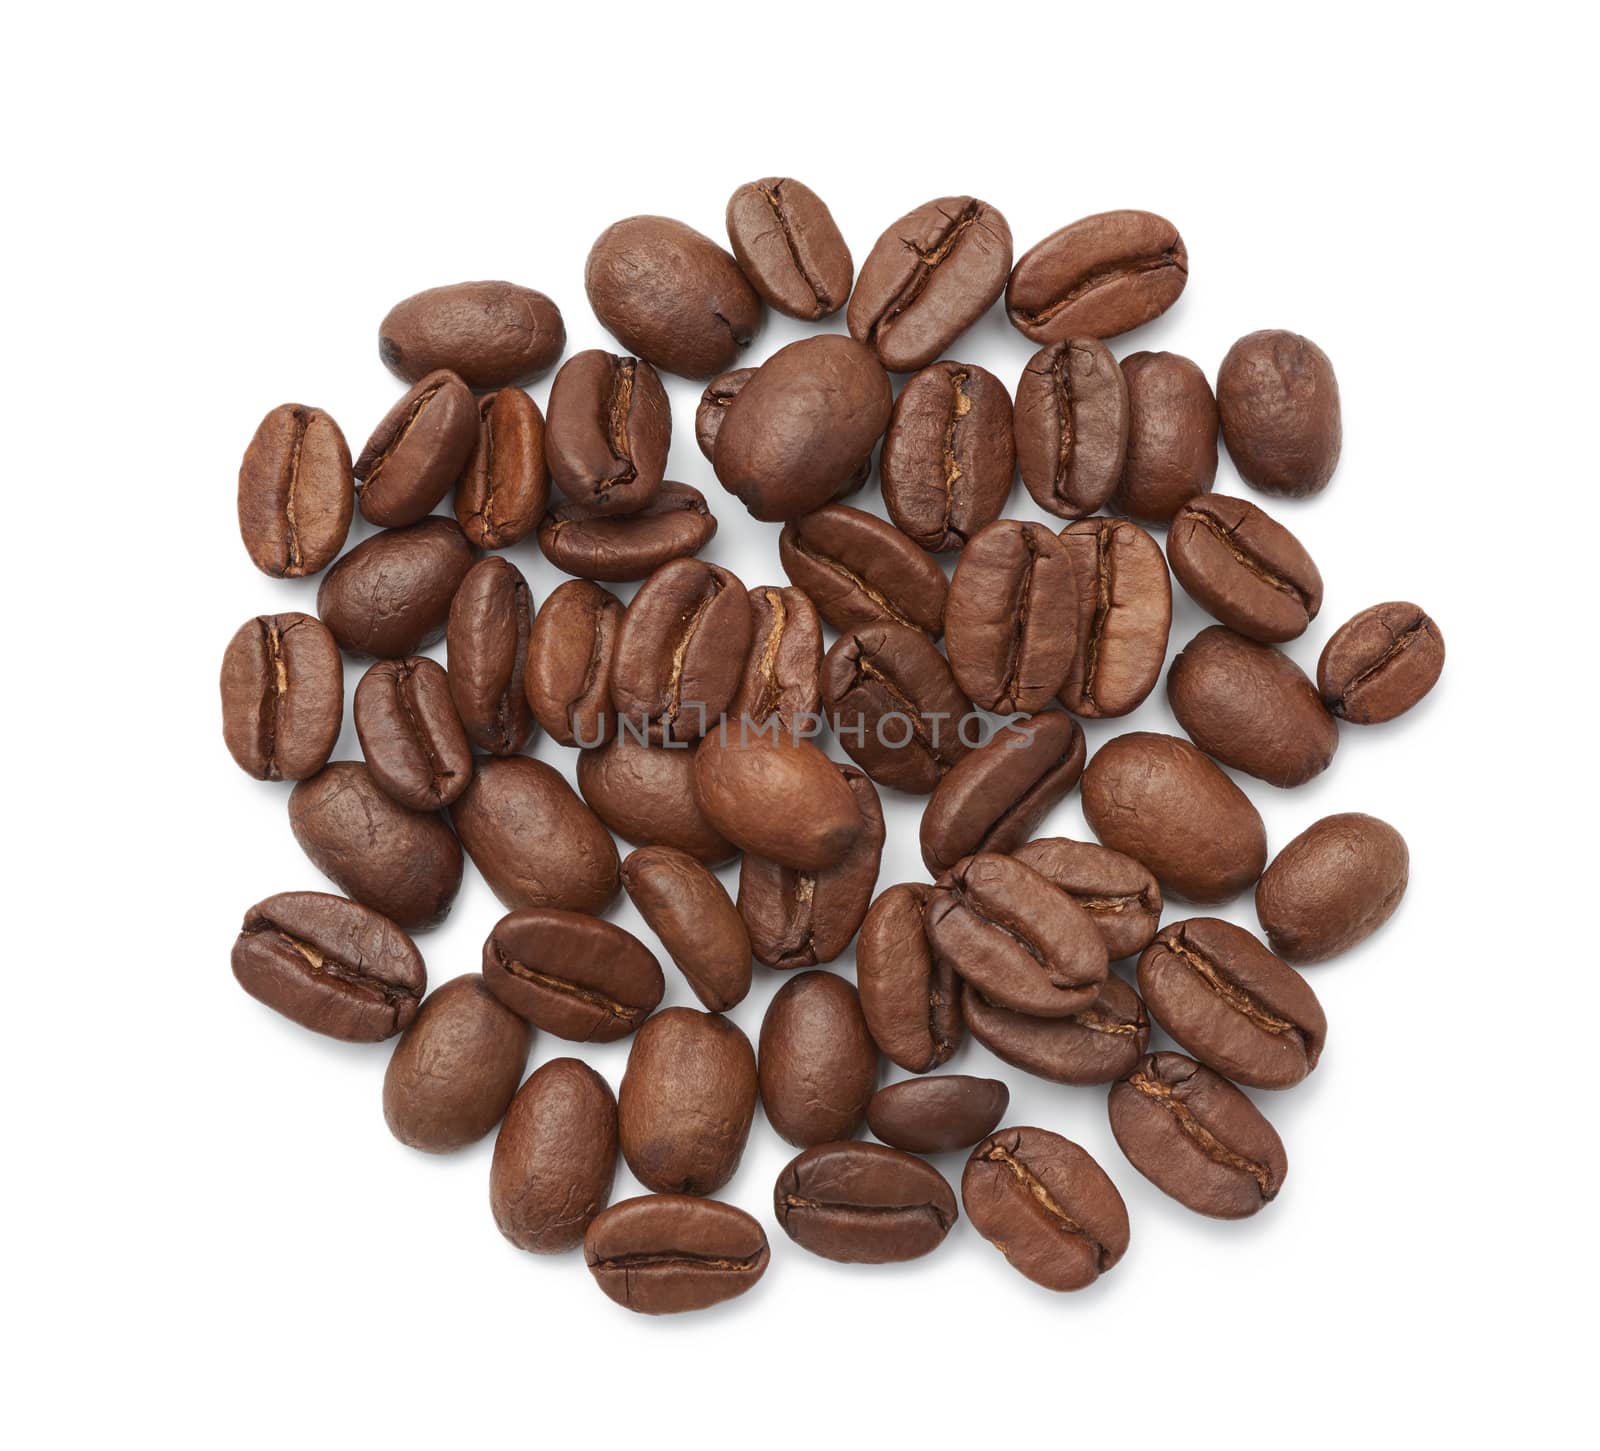 roasted coffee beans arabica isolated on a white background, bunch of flavorful ingredient